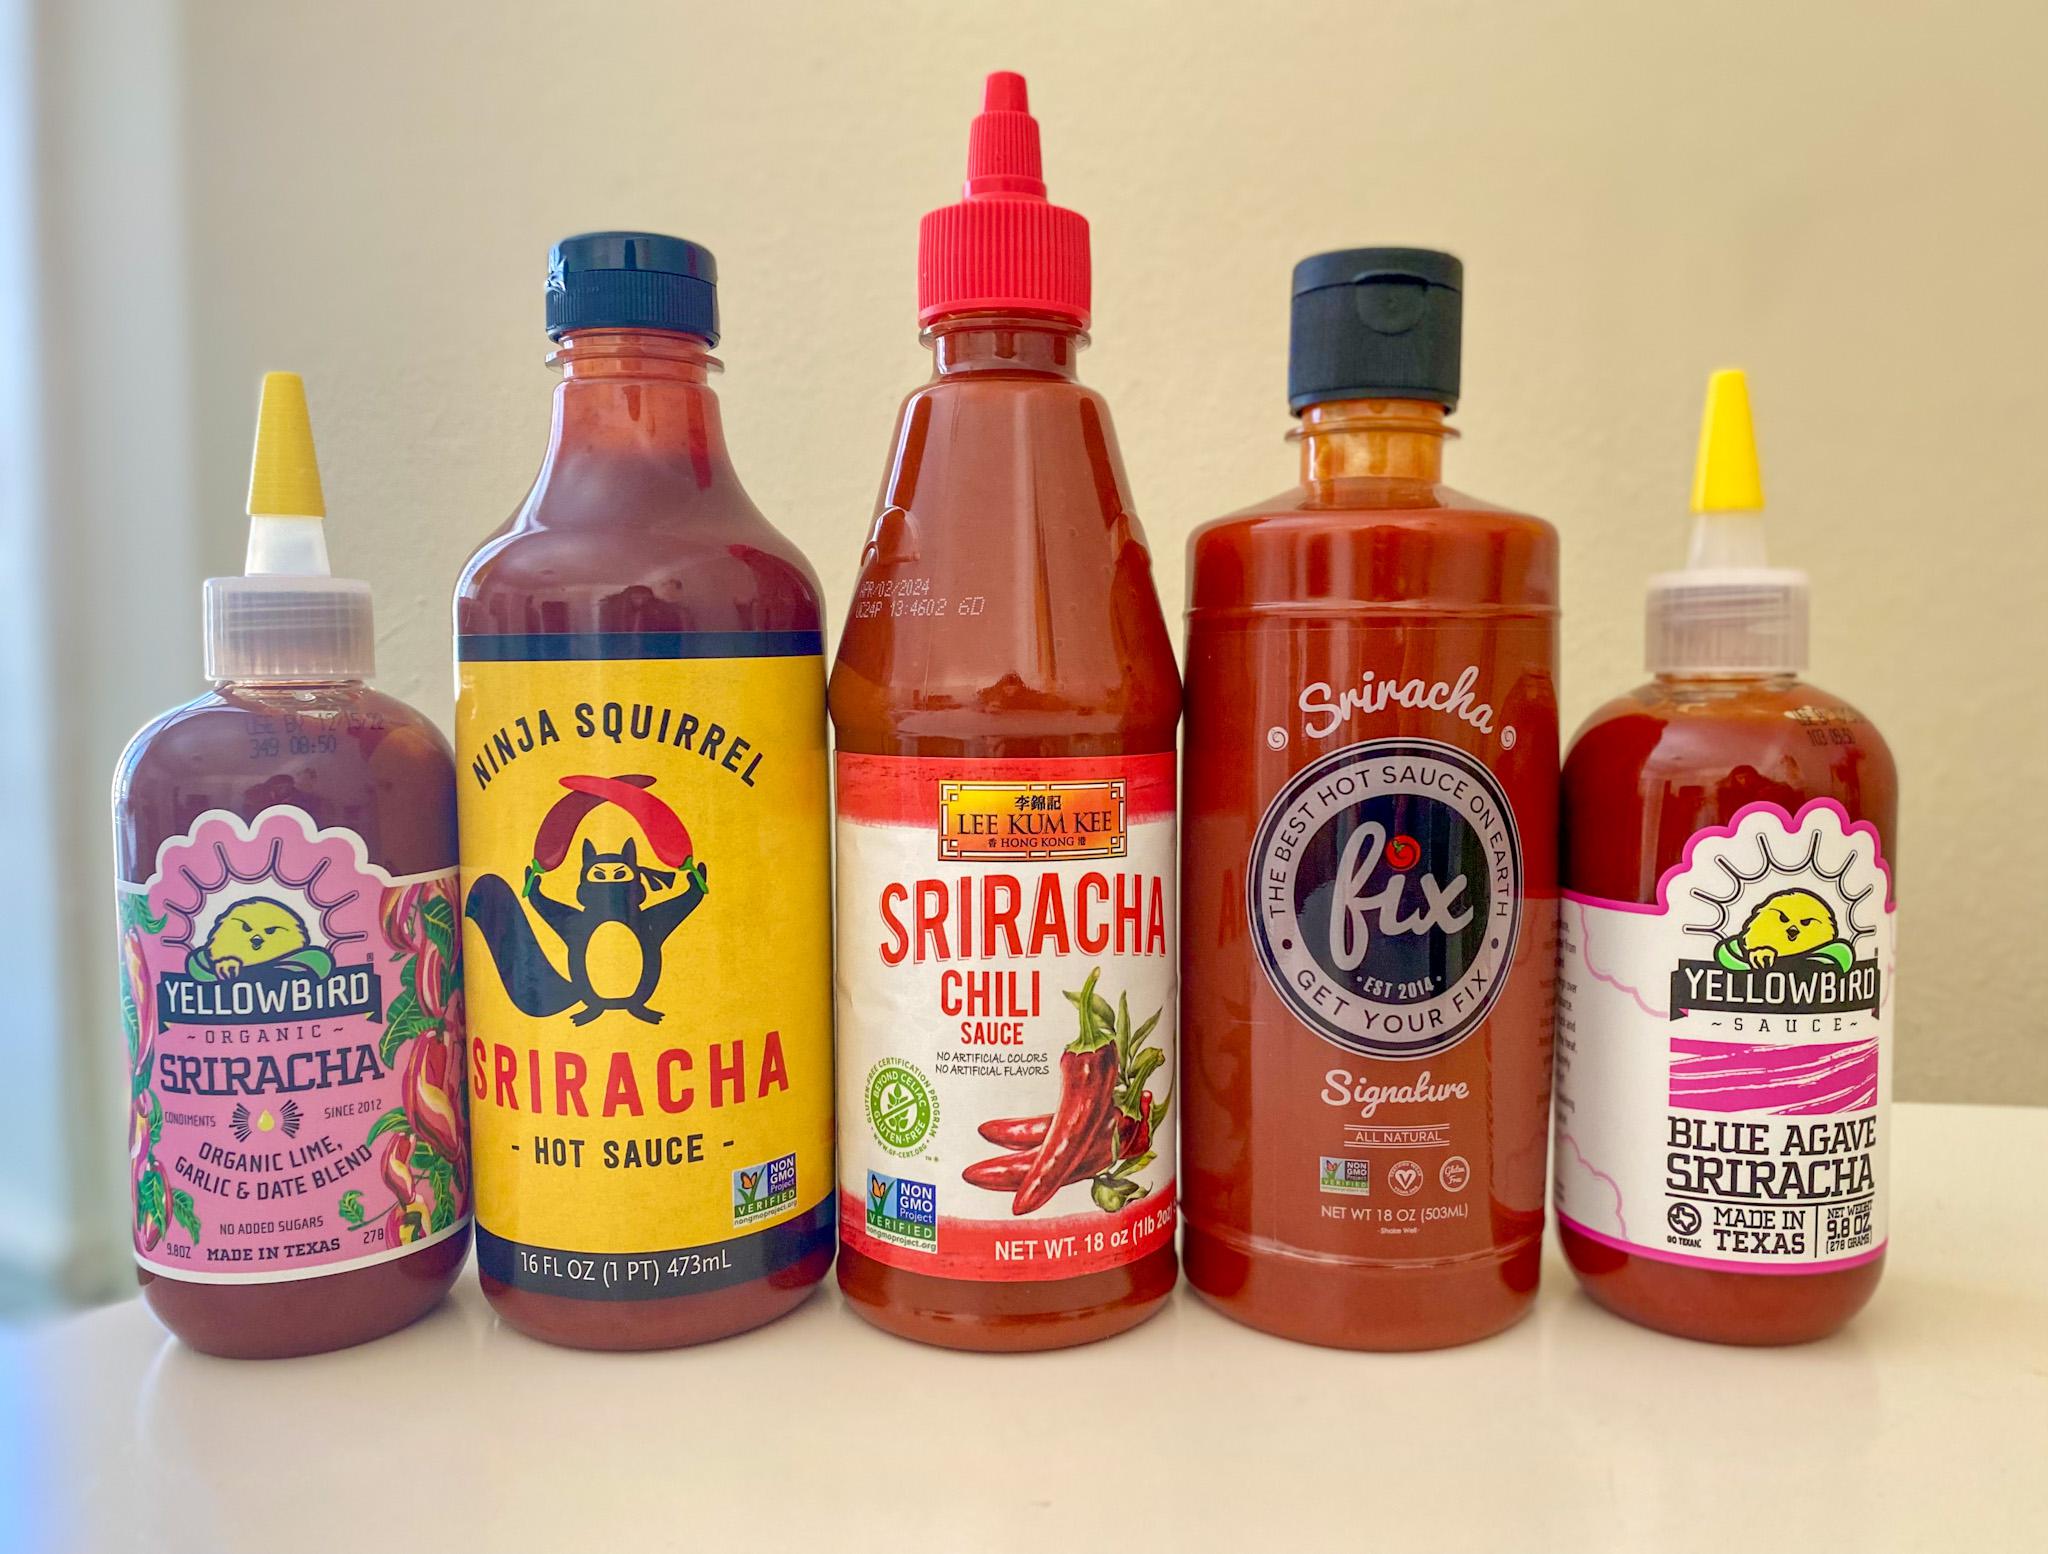 Can’t find Sriracha in the Bay Area? We tried six alternative brands to